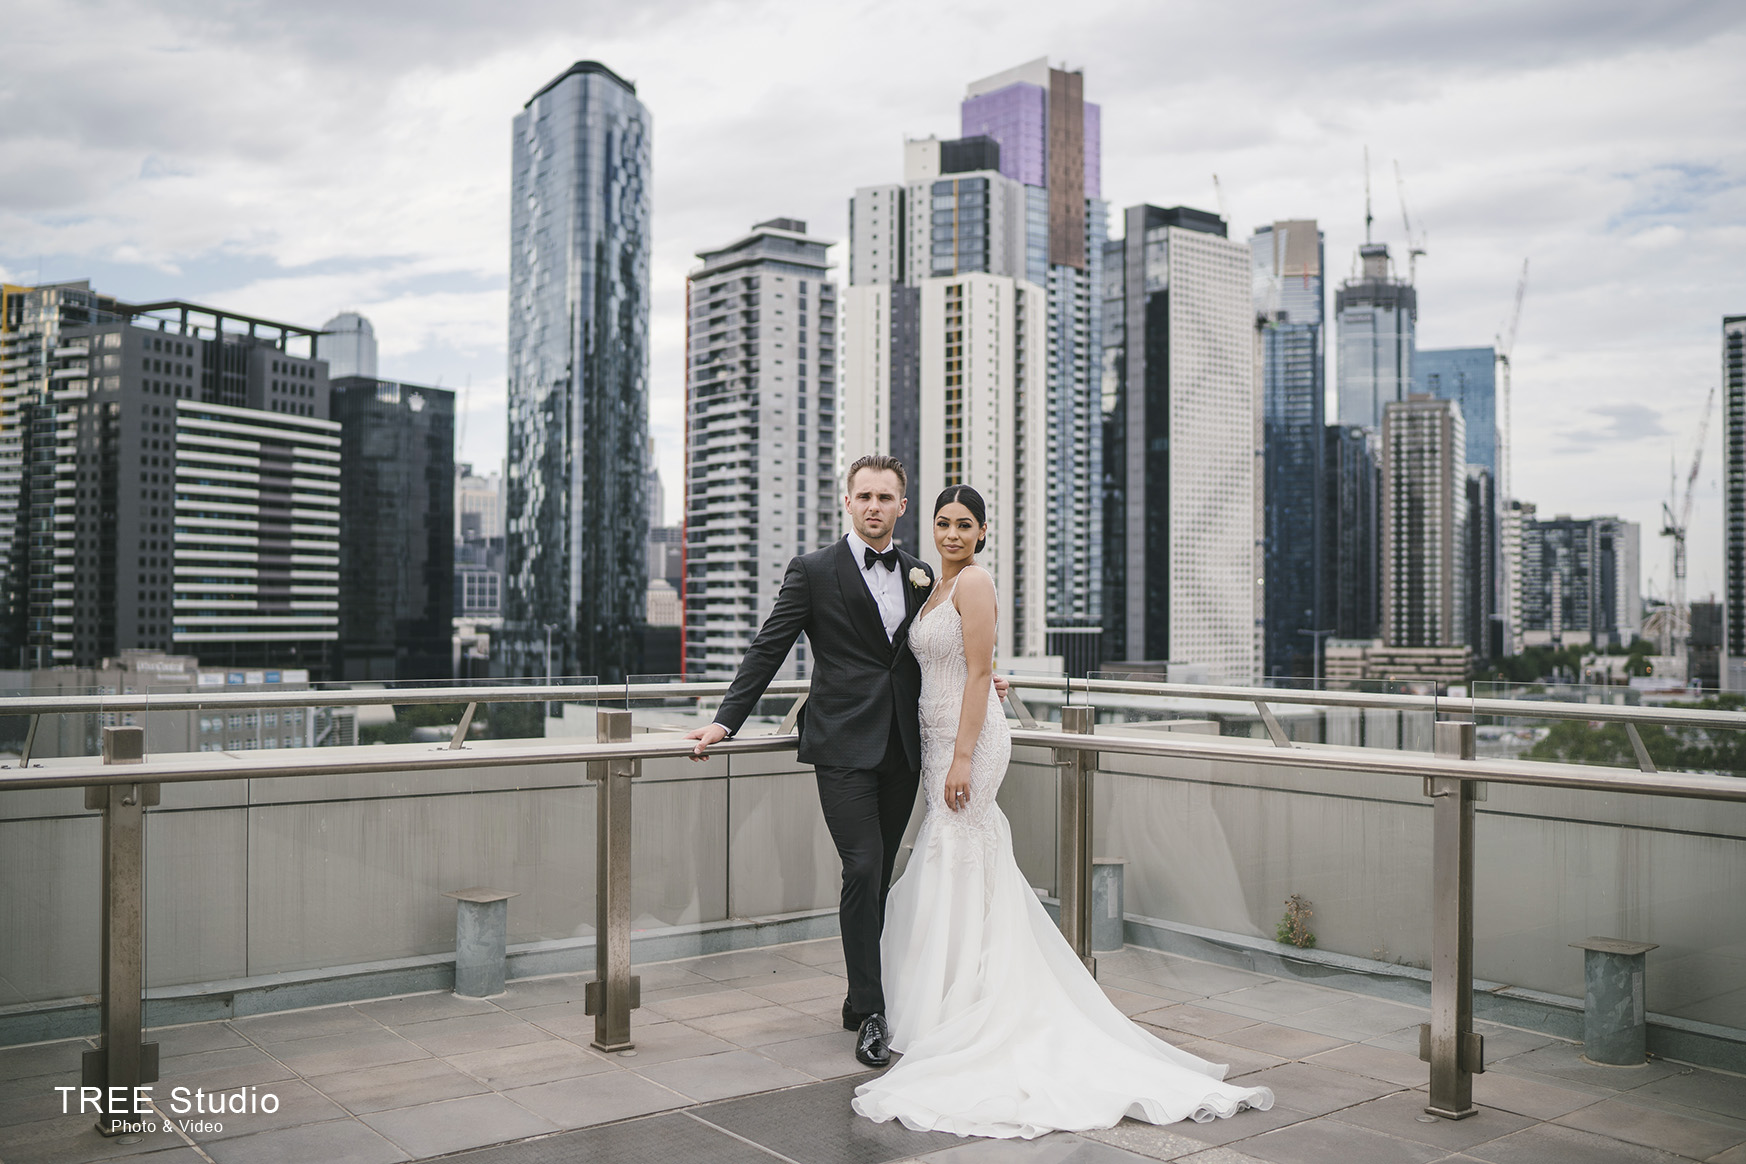 Dazzling Wedding Photography Melbourne preserves those intimate moments